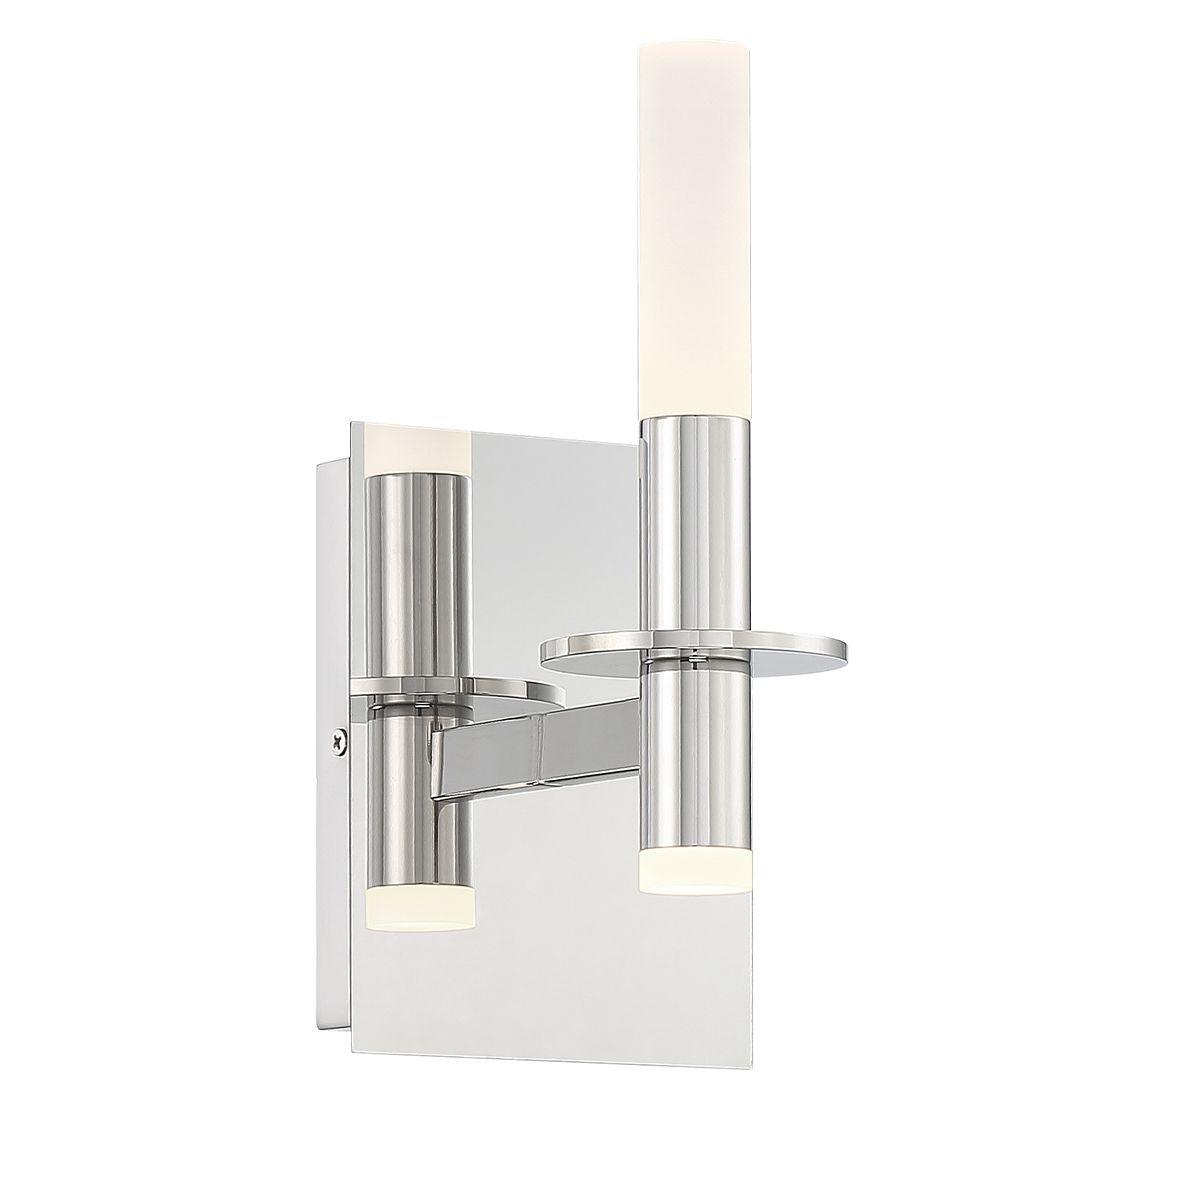 Torna 11 in. LED Bath Sconce